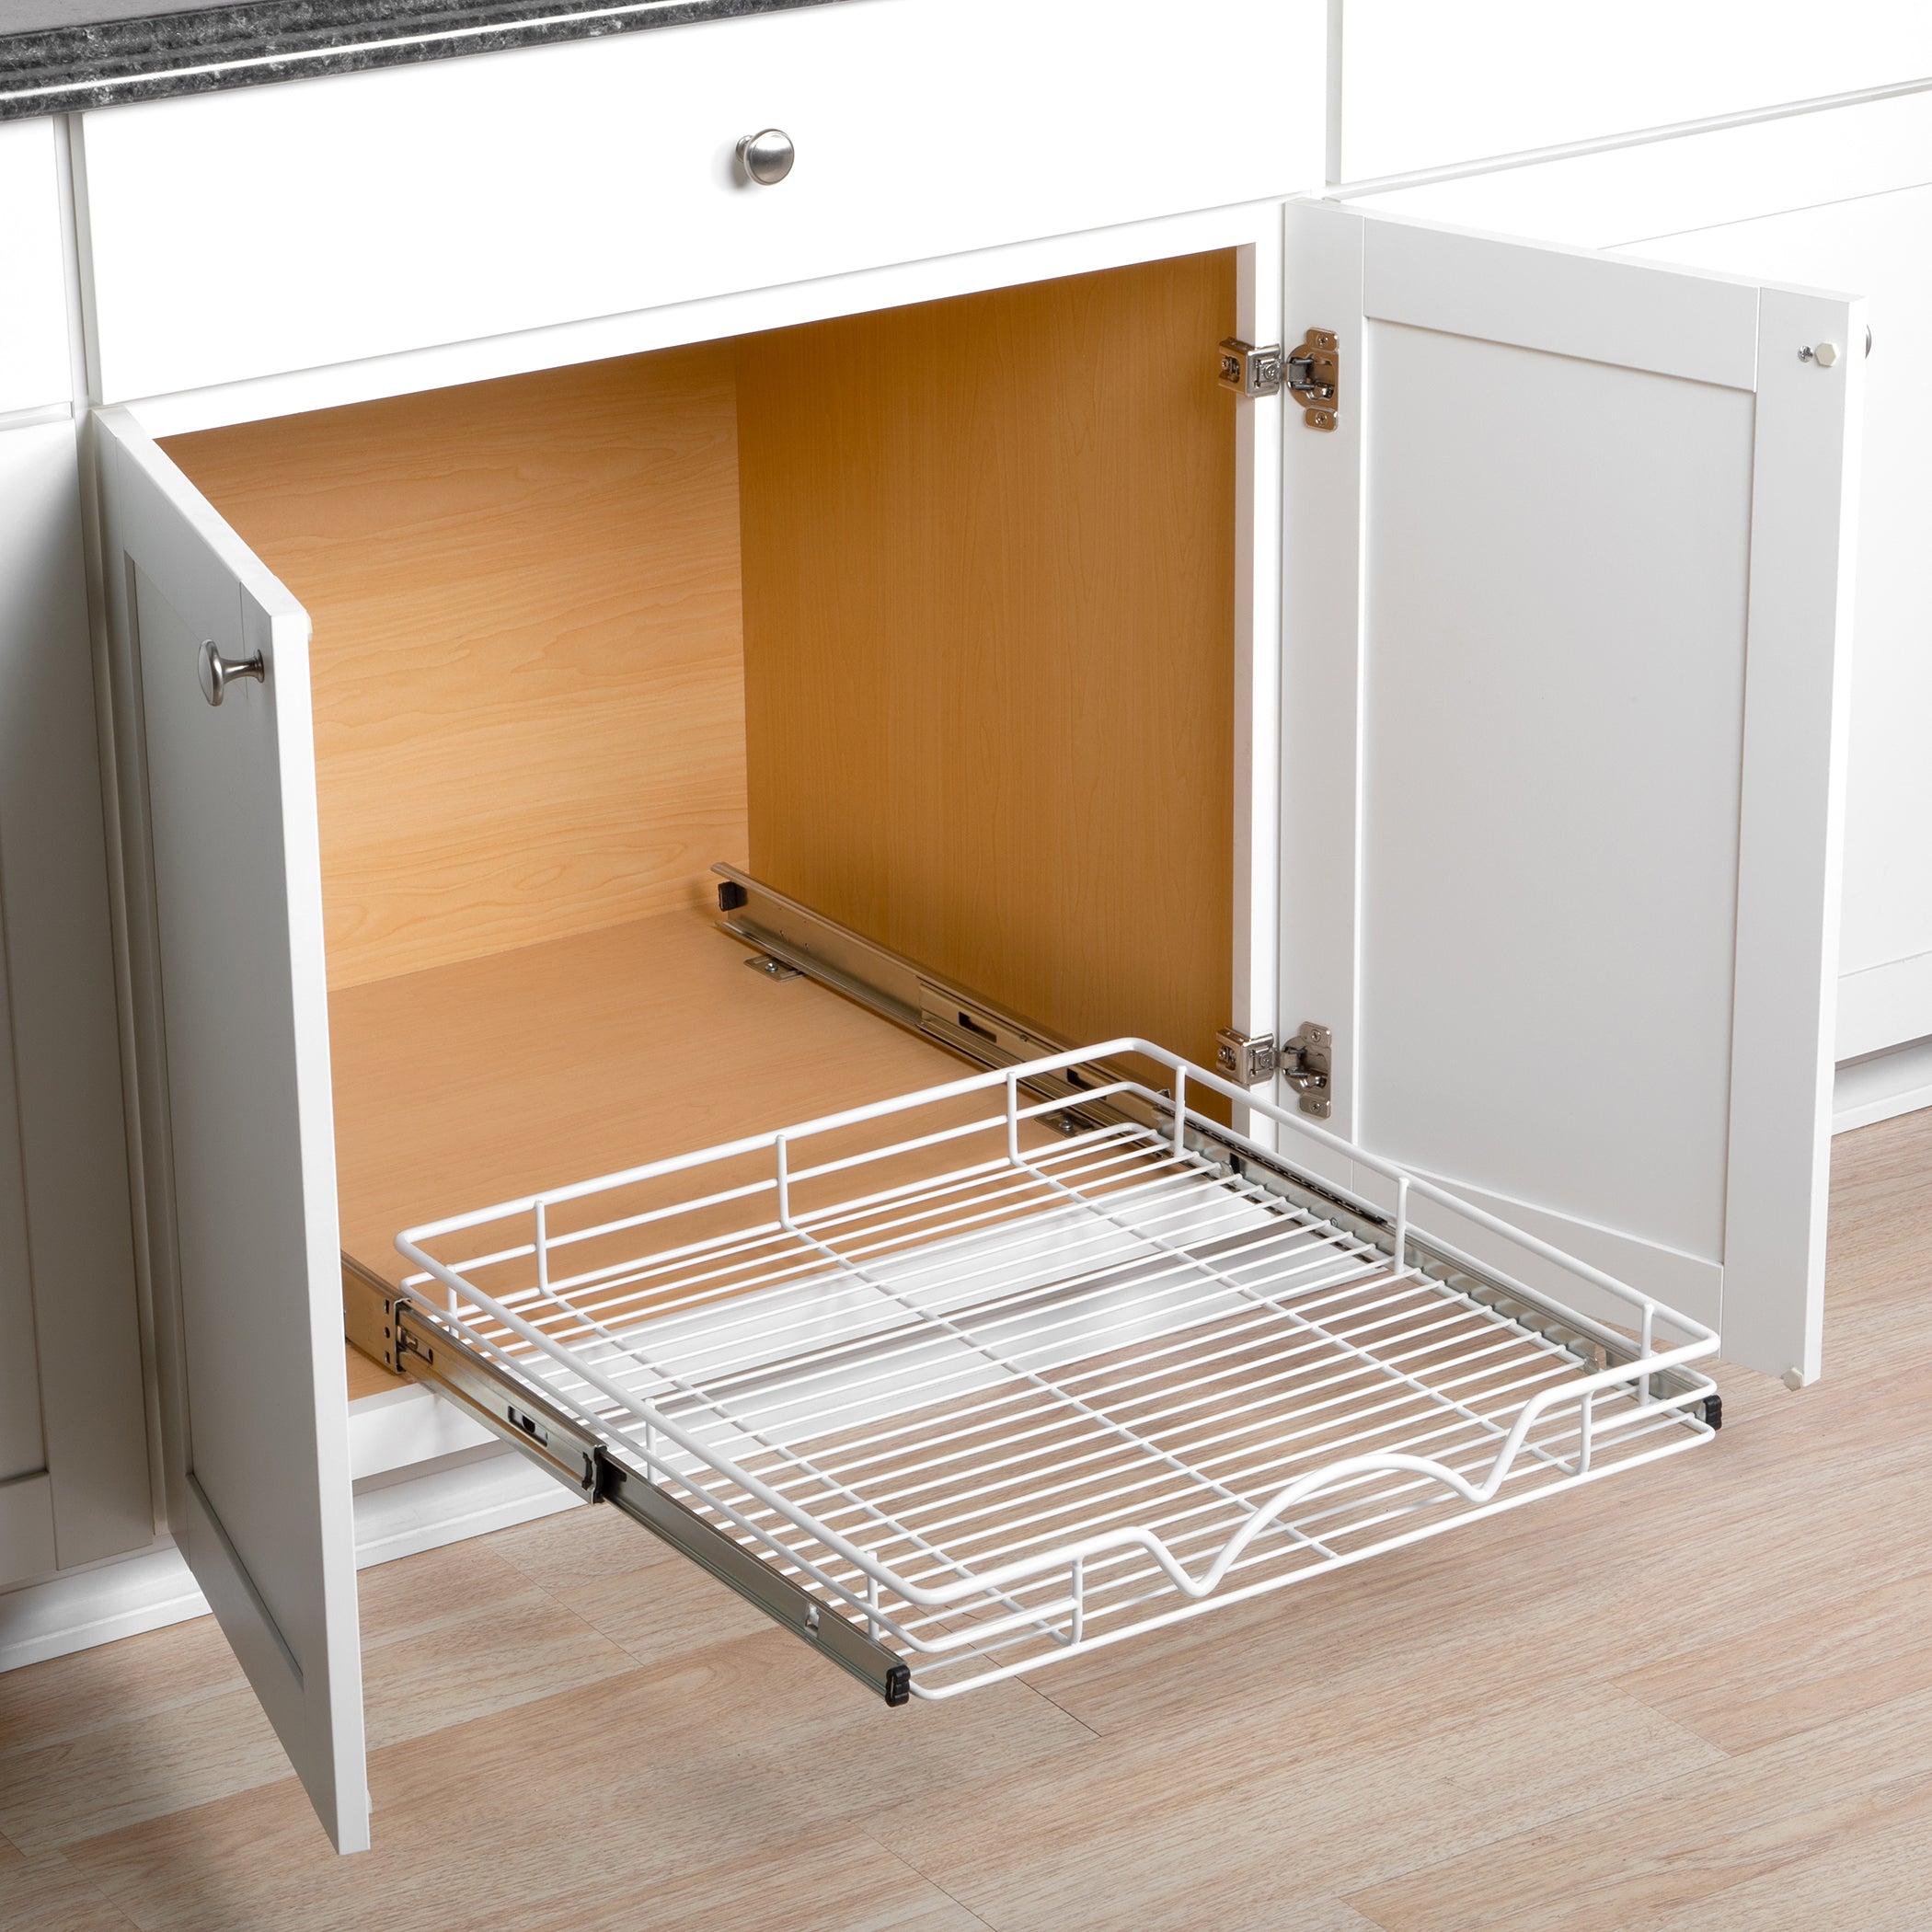 Hold N’ Storage Pull Out Cabinet Drawer Organizer, Heavy Duty-with 5 Year Limited Warranty, Steel Metal -White Finish